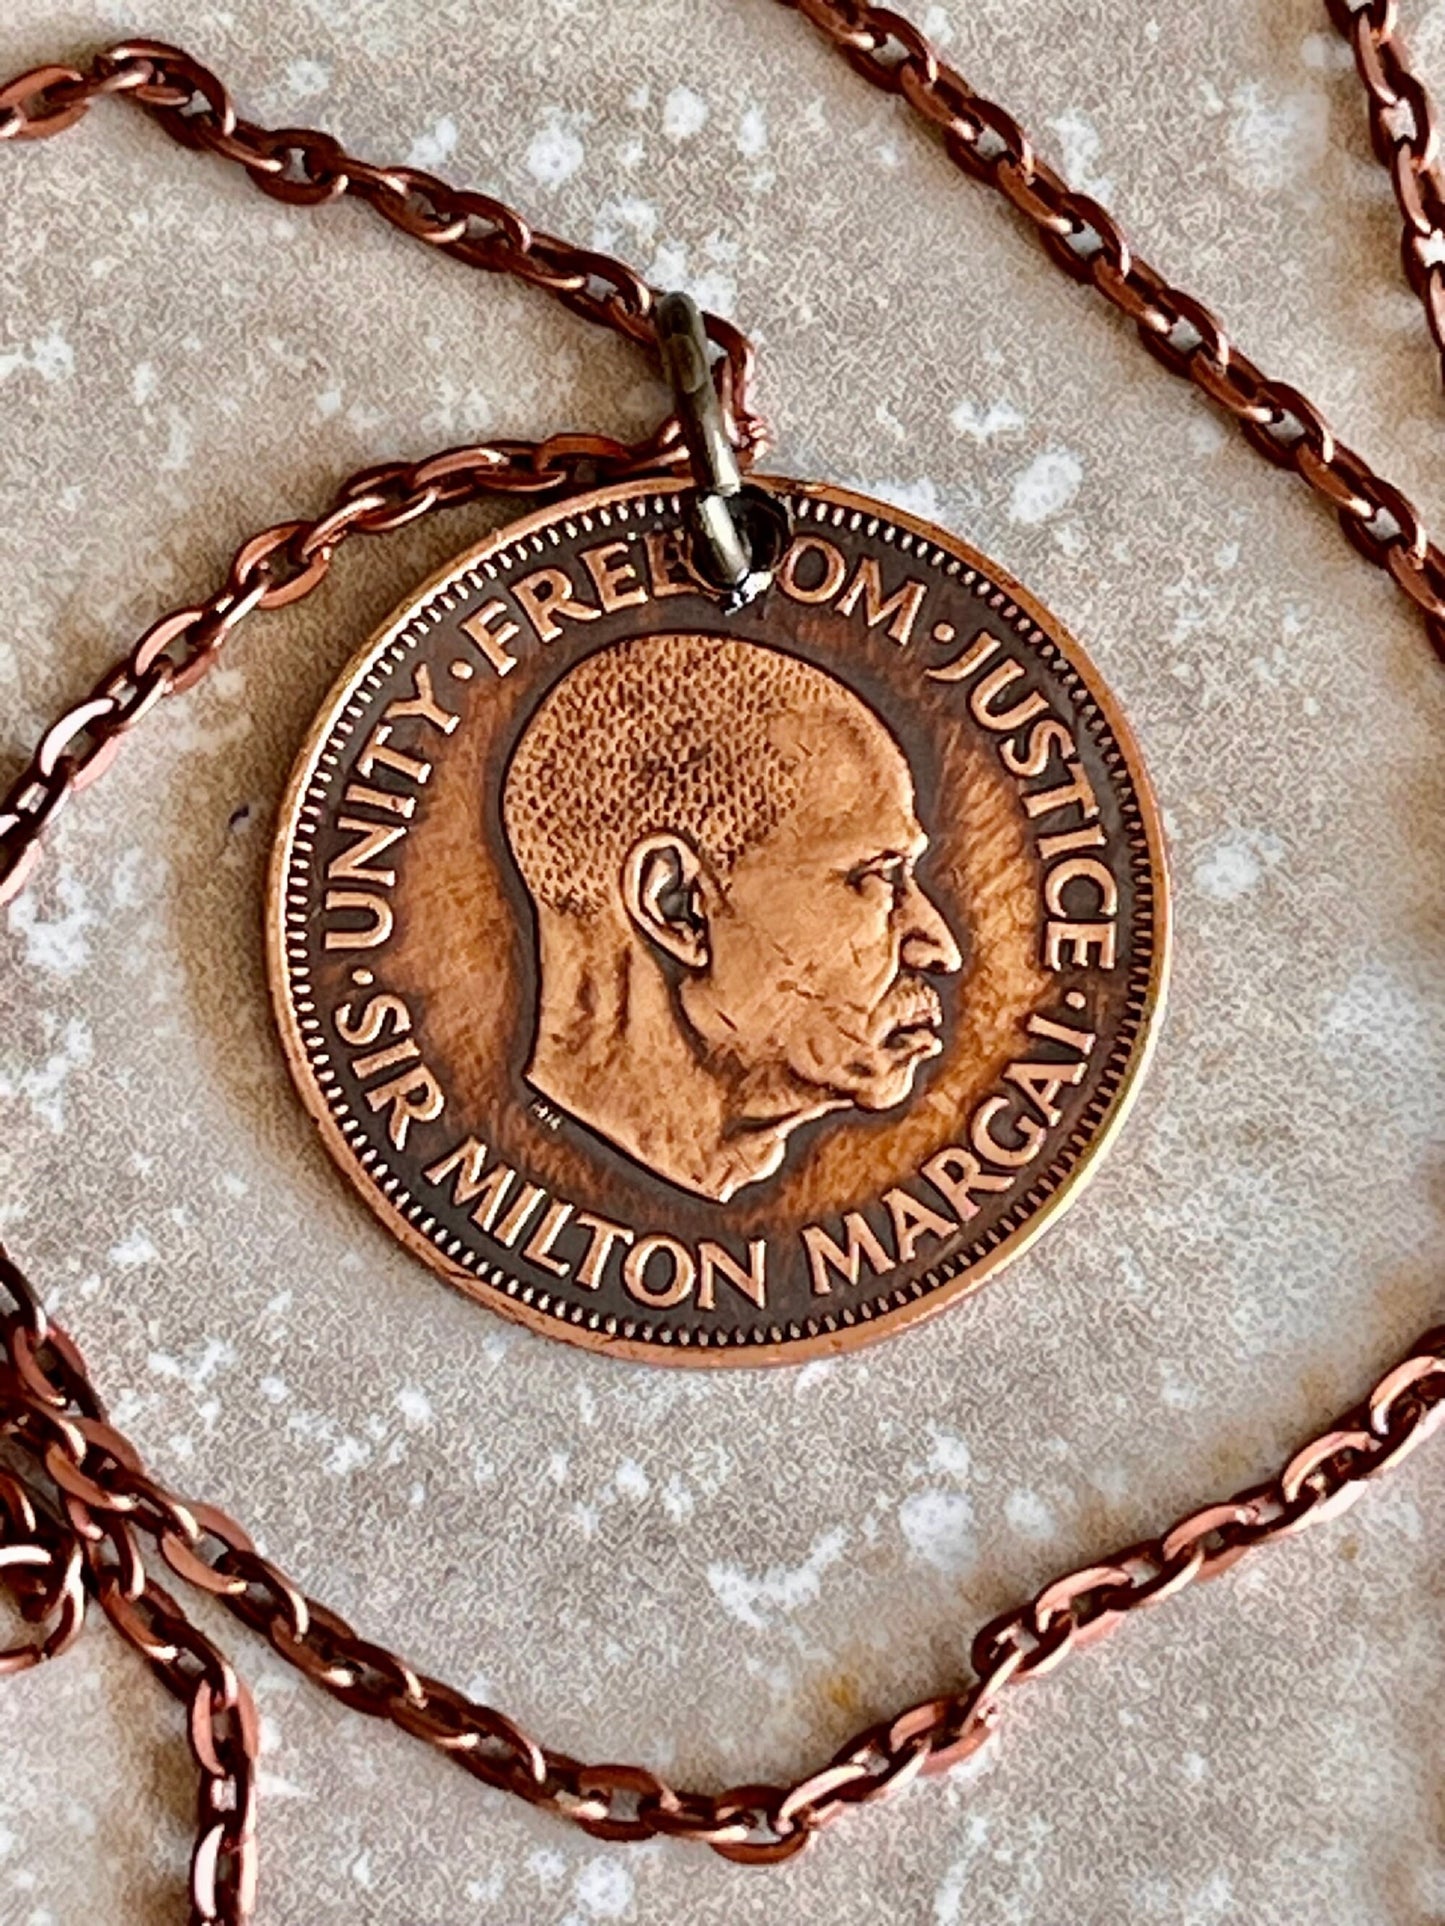 Sierra Leone Coin Pendant African 1 Cent Personal Necklace Old Vintage Handmade Jewelry Gift Friend Charm For Him Her World Coin Collector